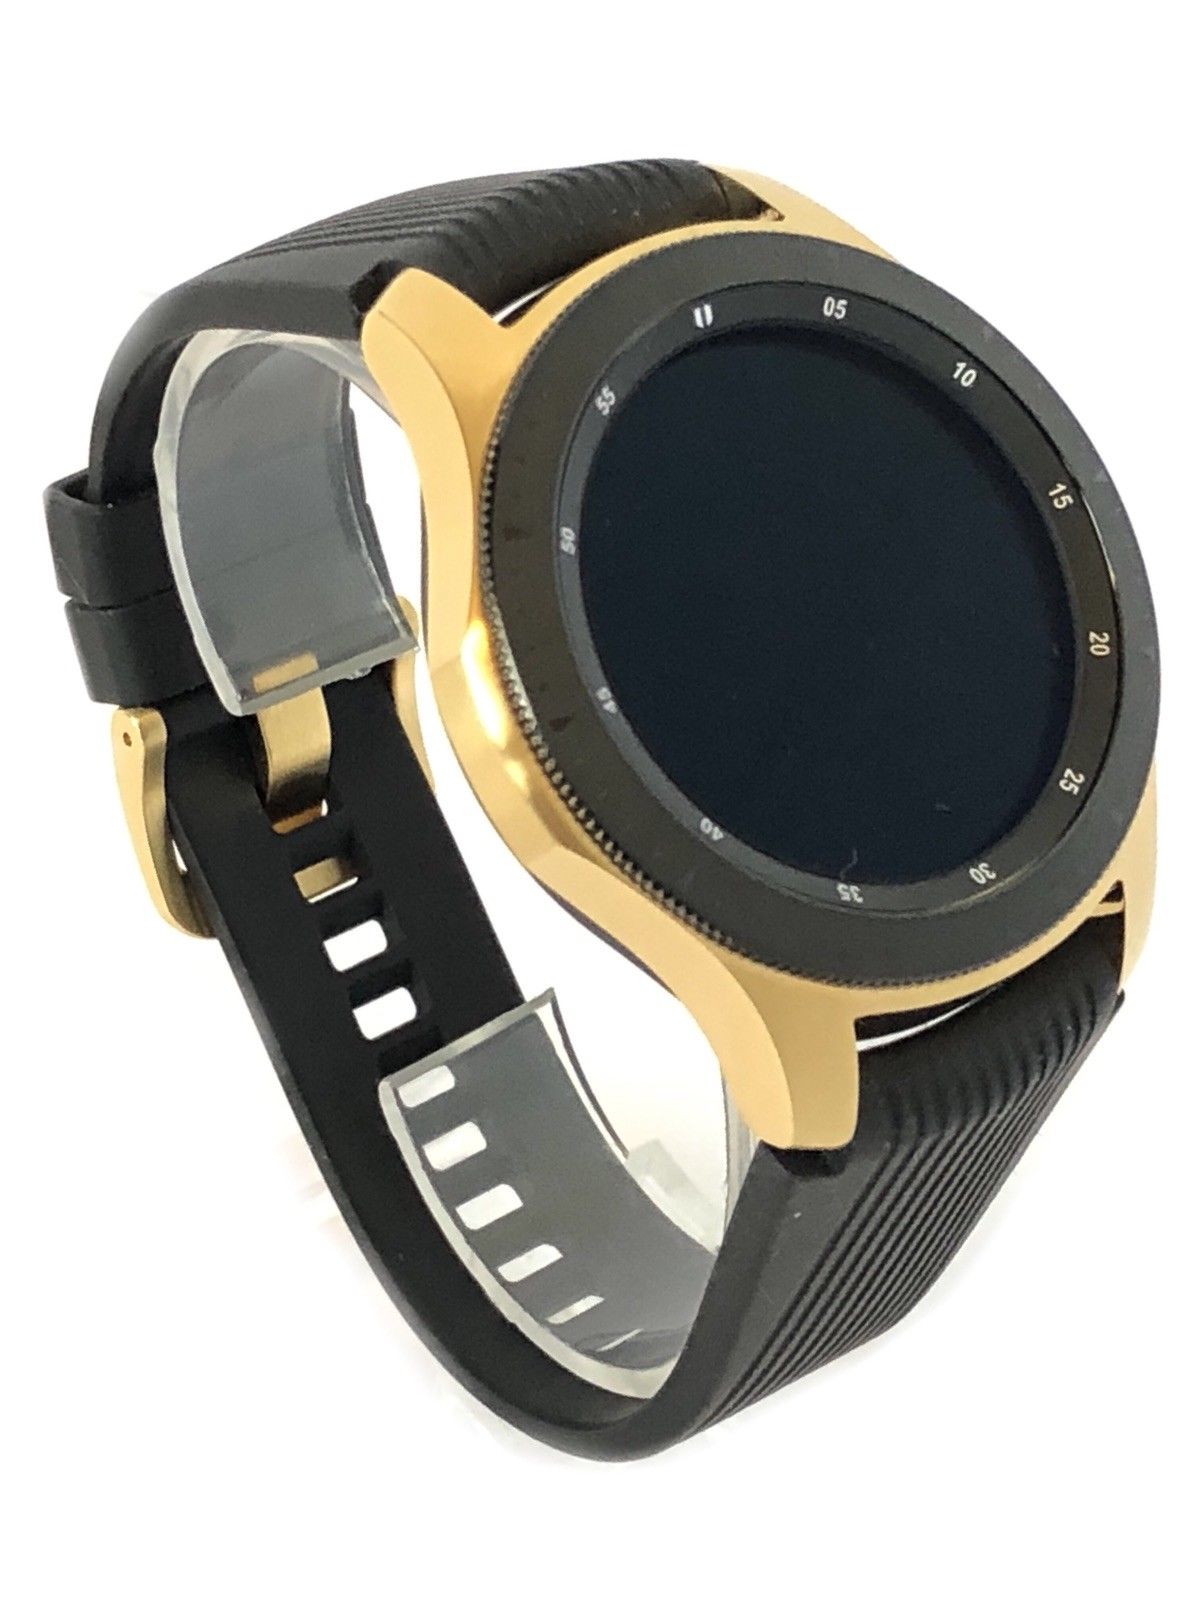 24K Gold Plated 46MM 2018 Samsung Galaxy Watch Black Band - image 2 of 2